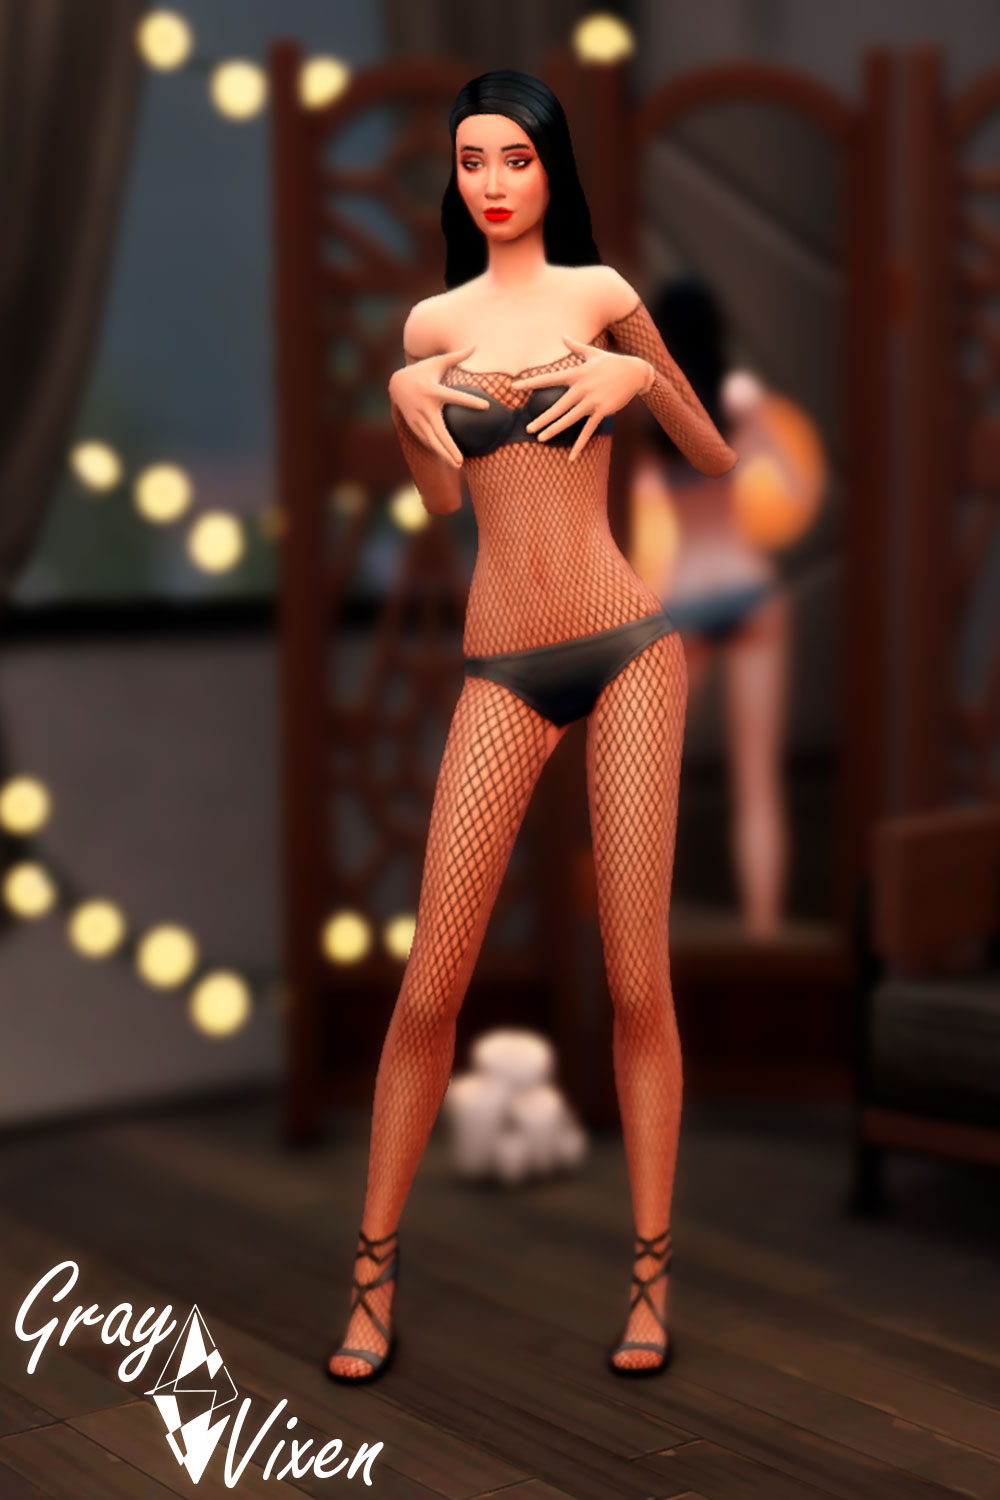 Fishnet Dresses + Lingerie Collection [ New Years Eve ] - The Sims